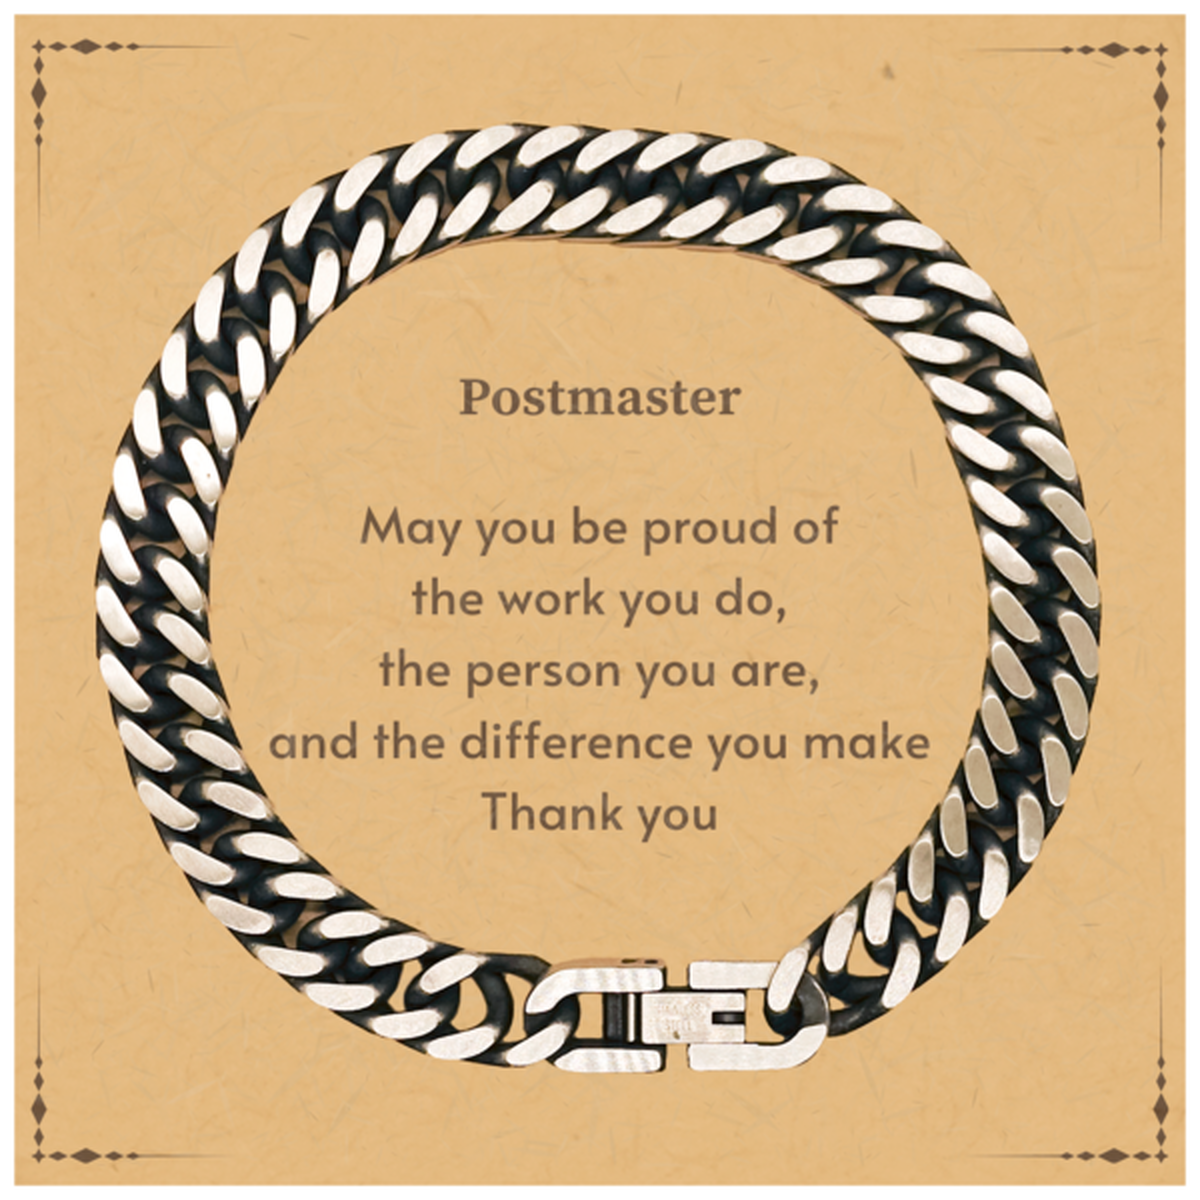 Heartwarming Cuban Link Chain Bracelet Retirement Coworkers Gifts for Postmaster, Postmaster May You be proud of the work you do, the person you are Gifts for Boss Men Women Friends